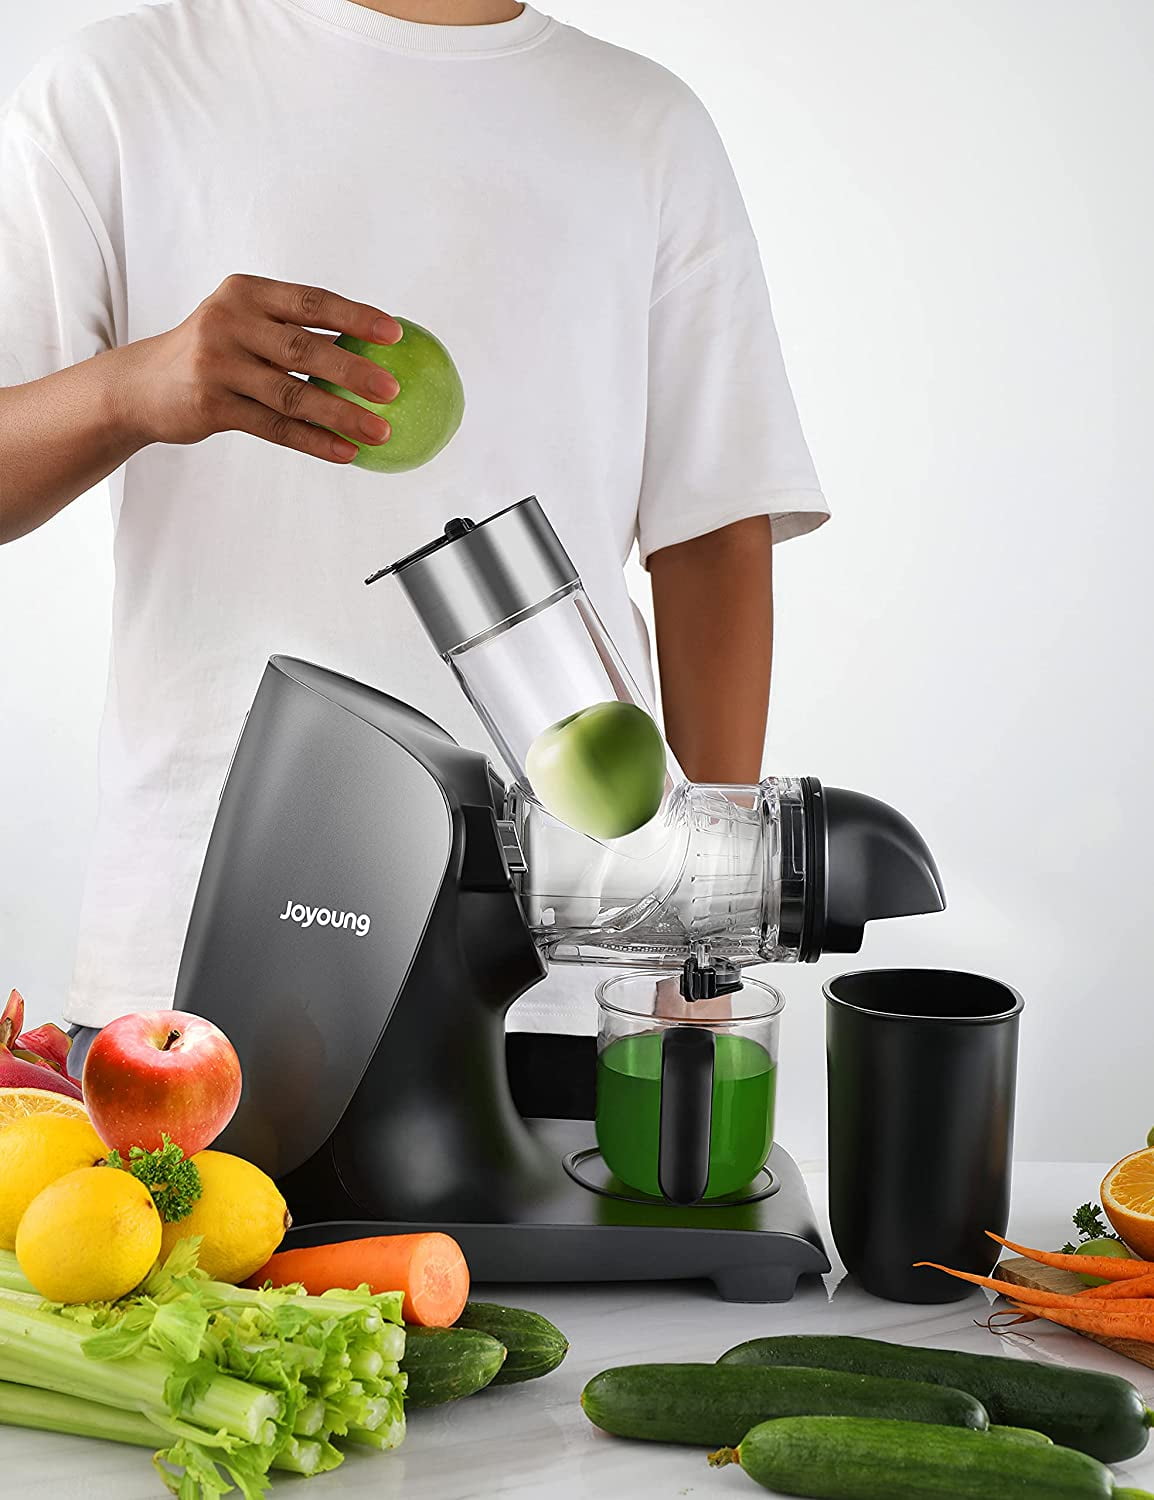 JOYOUNG Juicer Machines with Upgraded Ceramic Auger Masticating Juicer up to 90% Juice Yield Slow Juicer 3 inches Large Feed Chute BPA Free Easy to Clean 